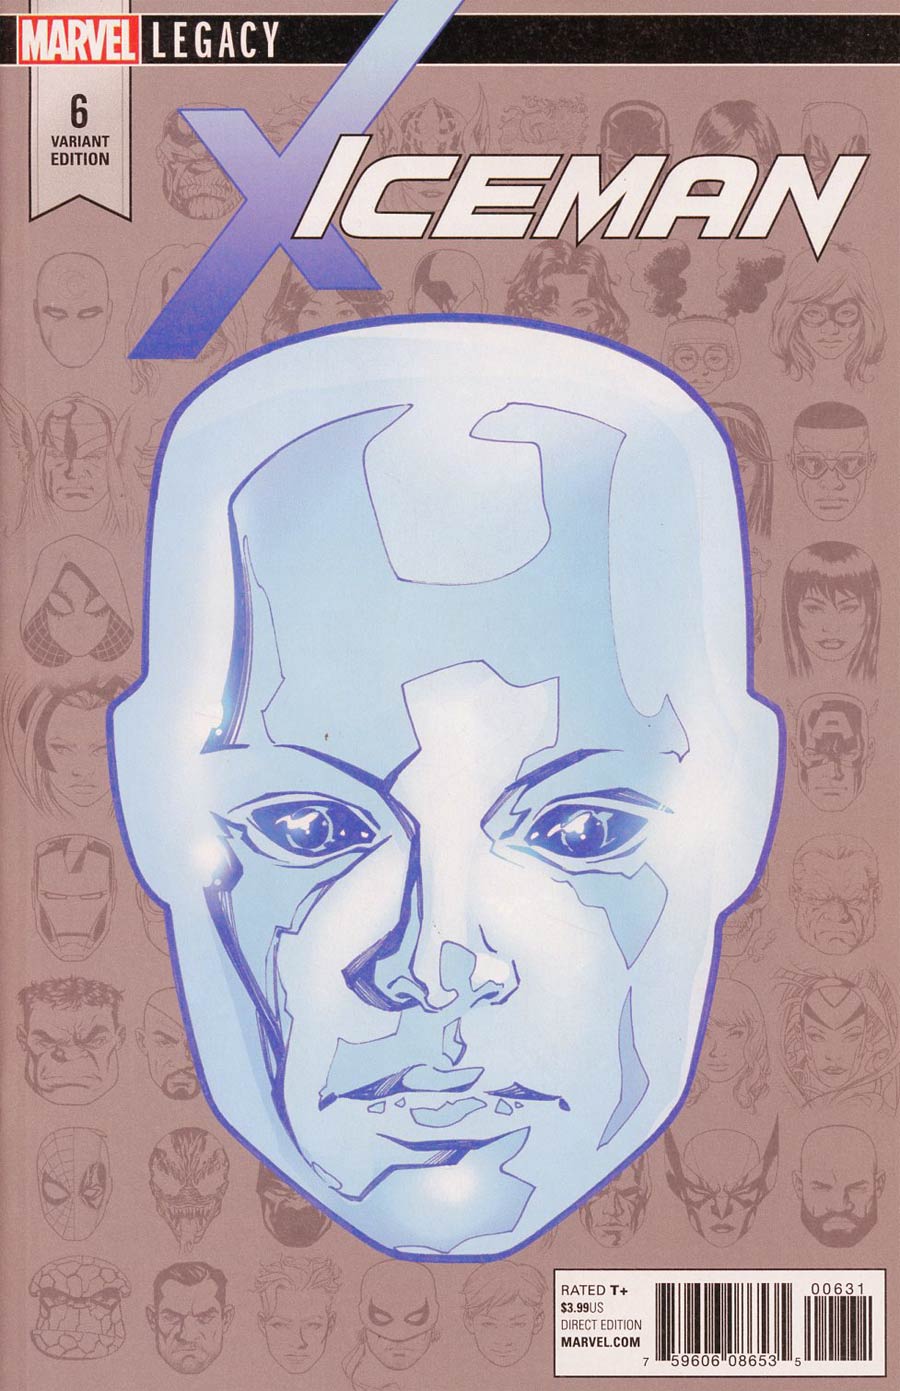 Iceman Vol 3 #6 Cover C Incentive Mike McKone Legacy Headshot Variant Cover (Marvel Legacy Tie-In)